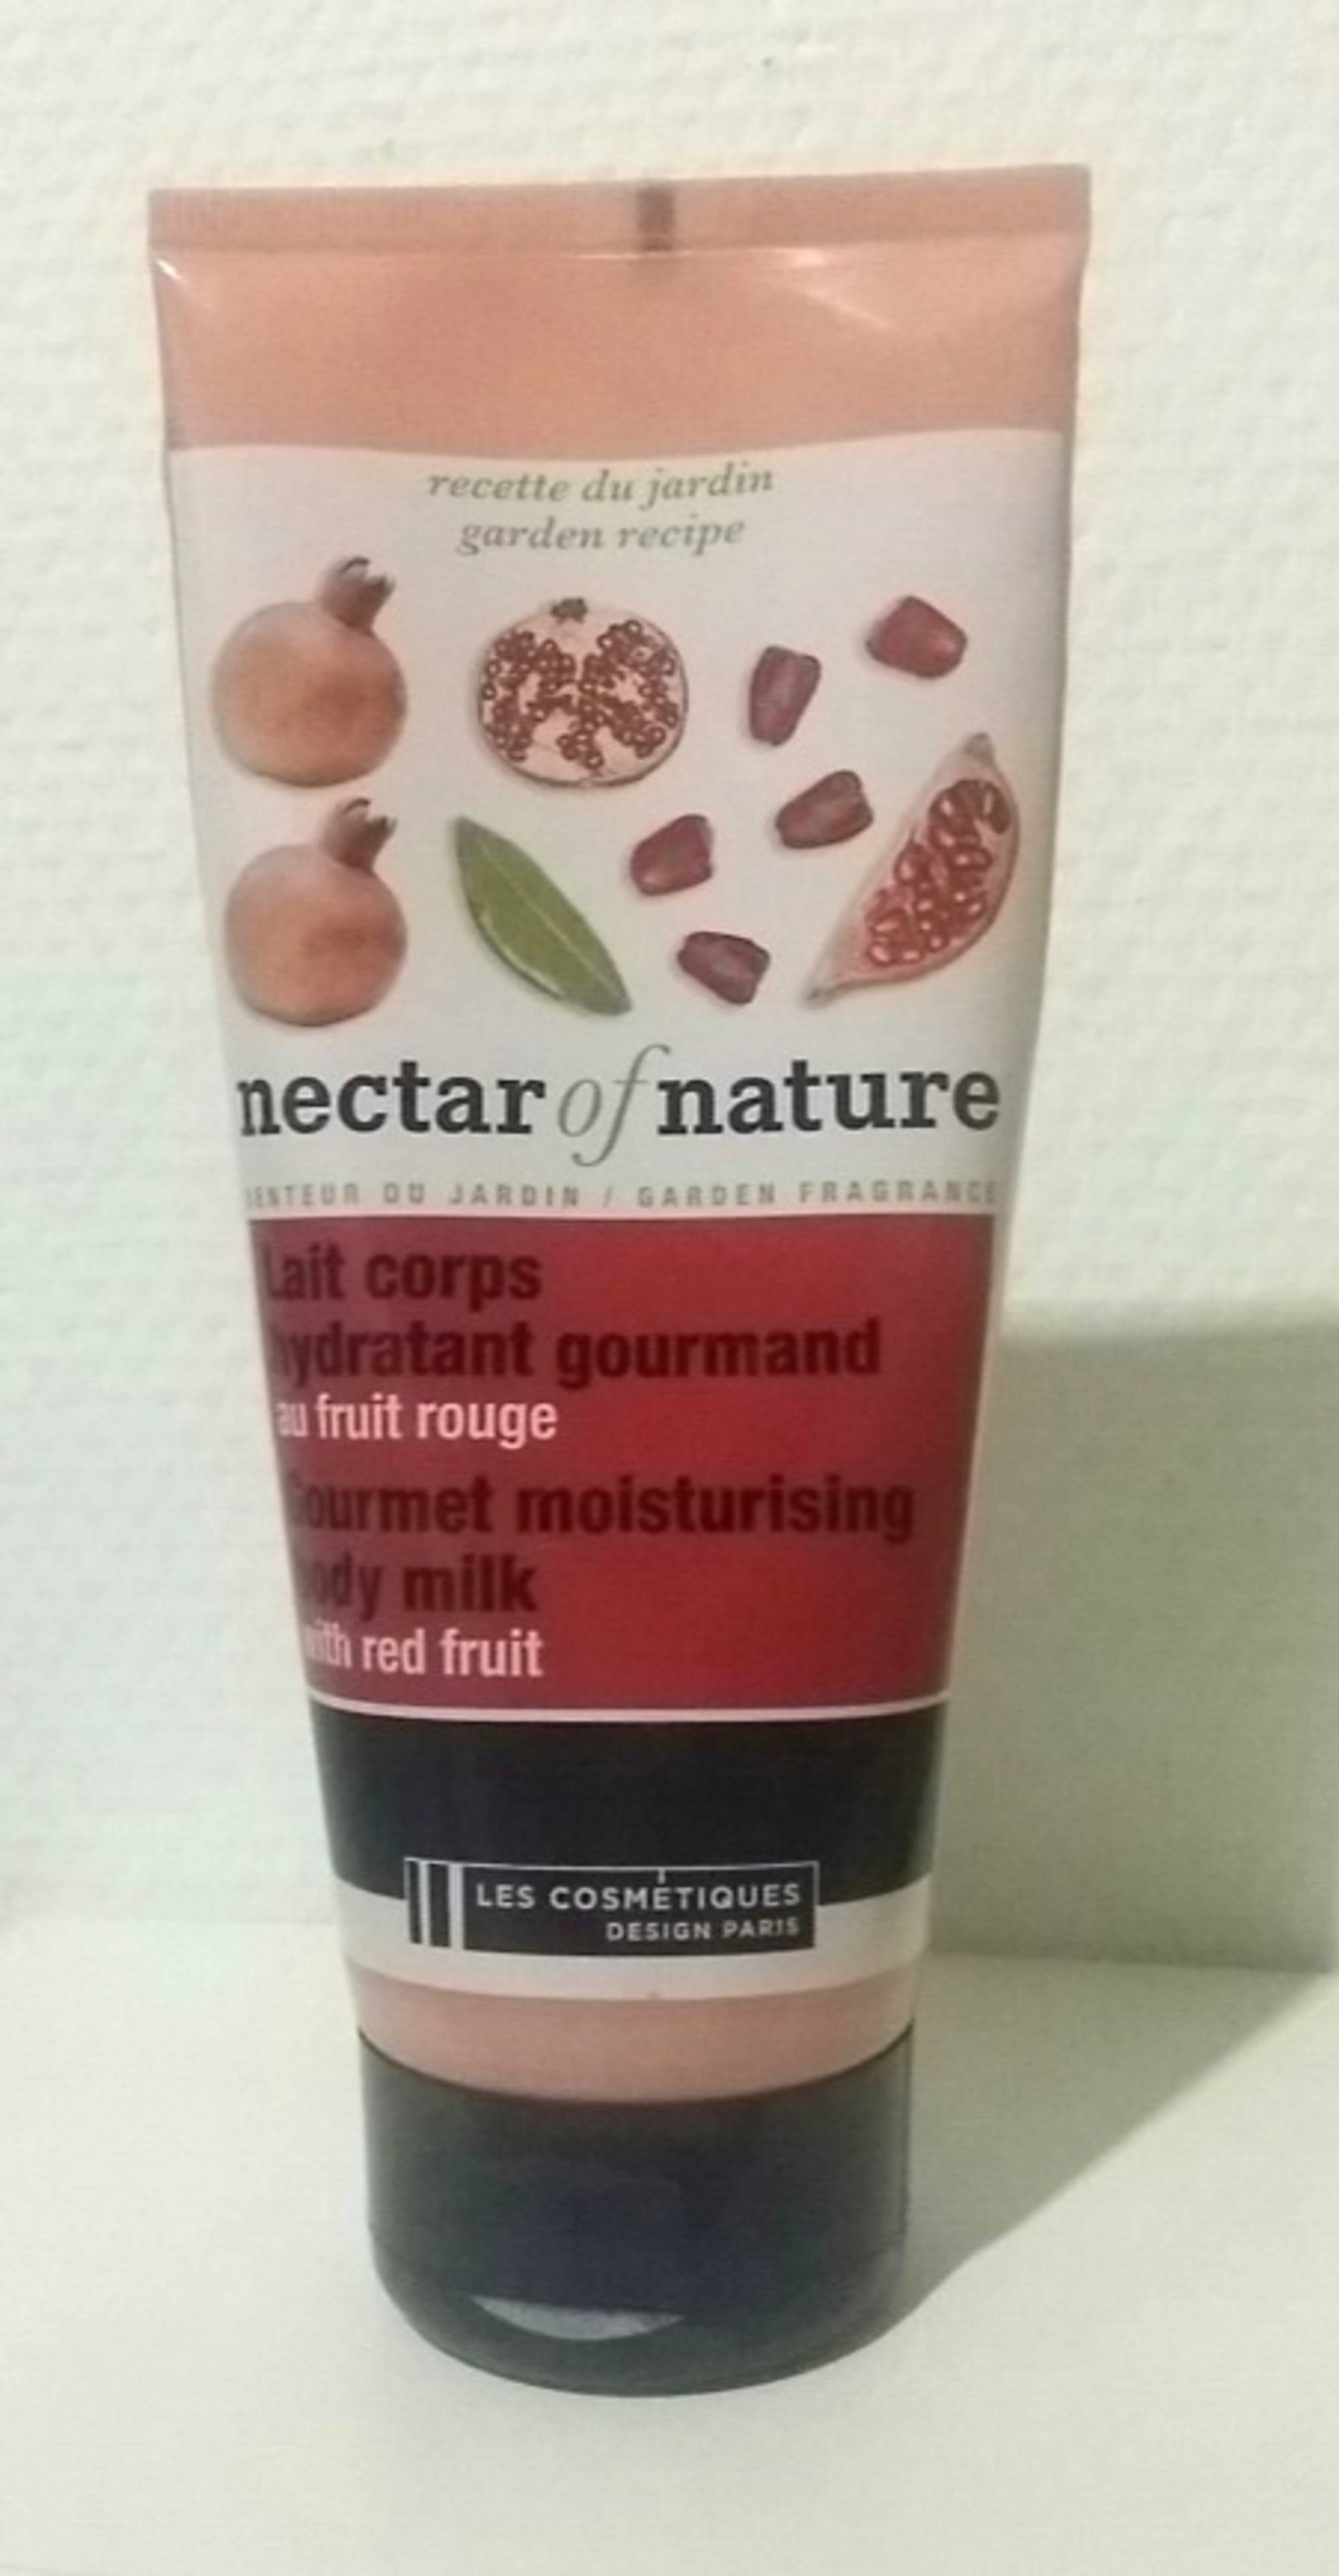 NECTAR OF NATURE - Lait corps - Hydratant gourmand